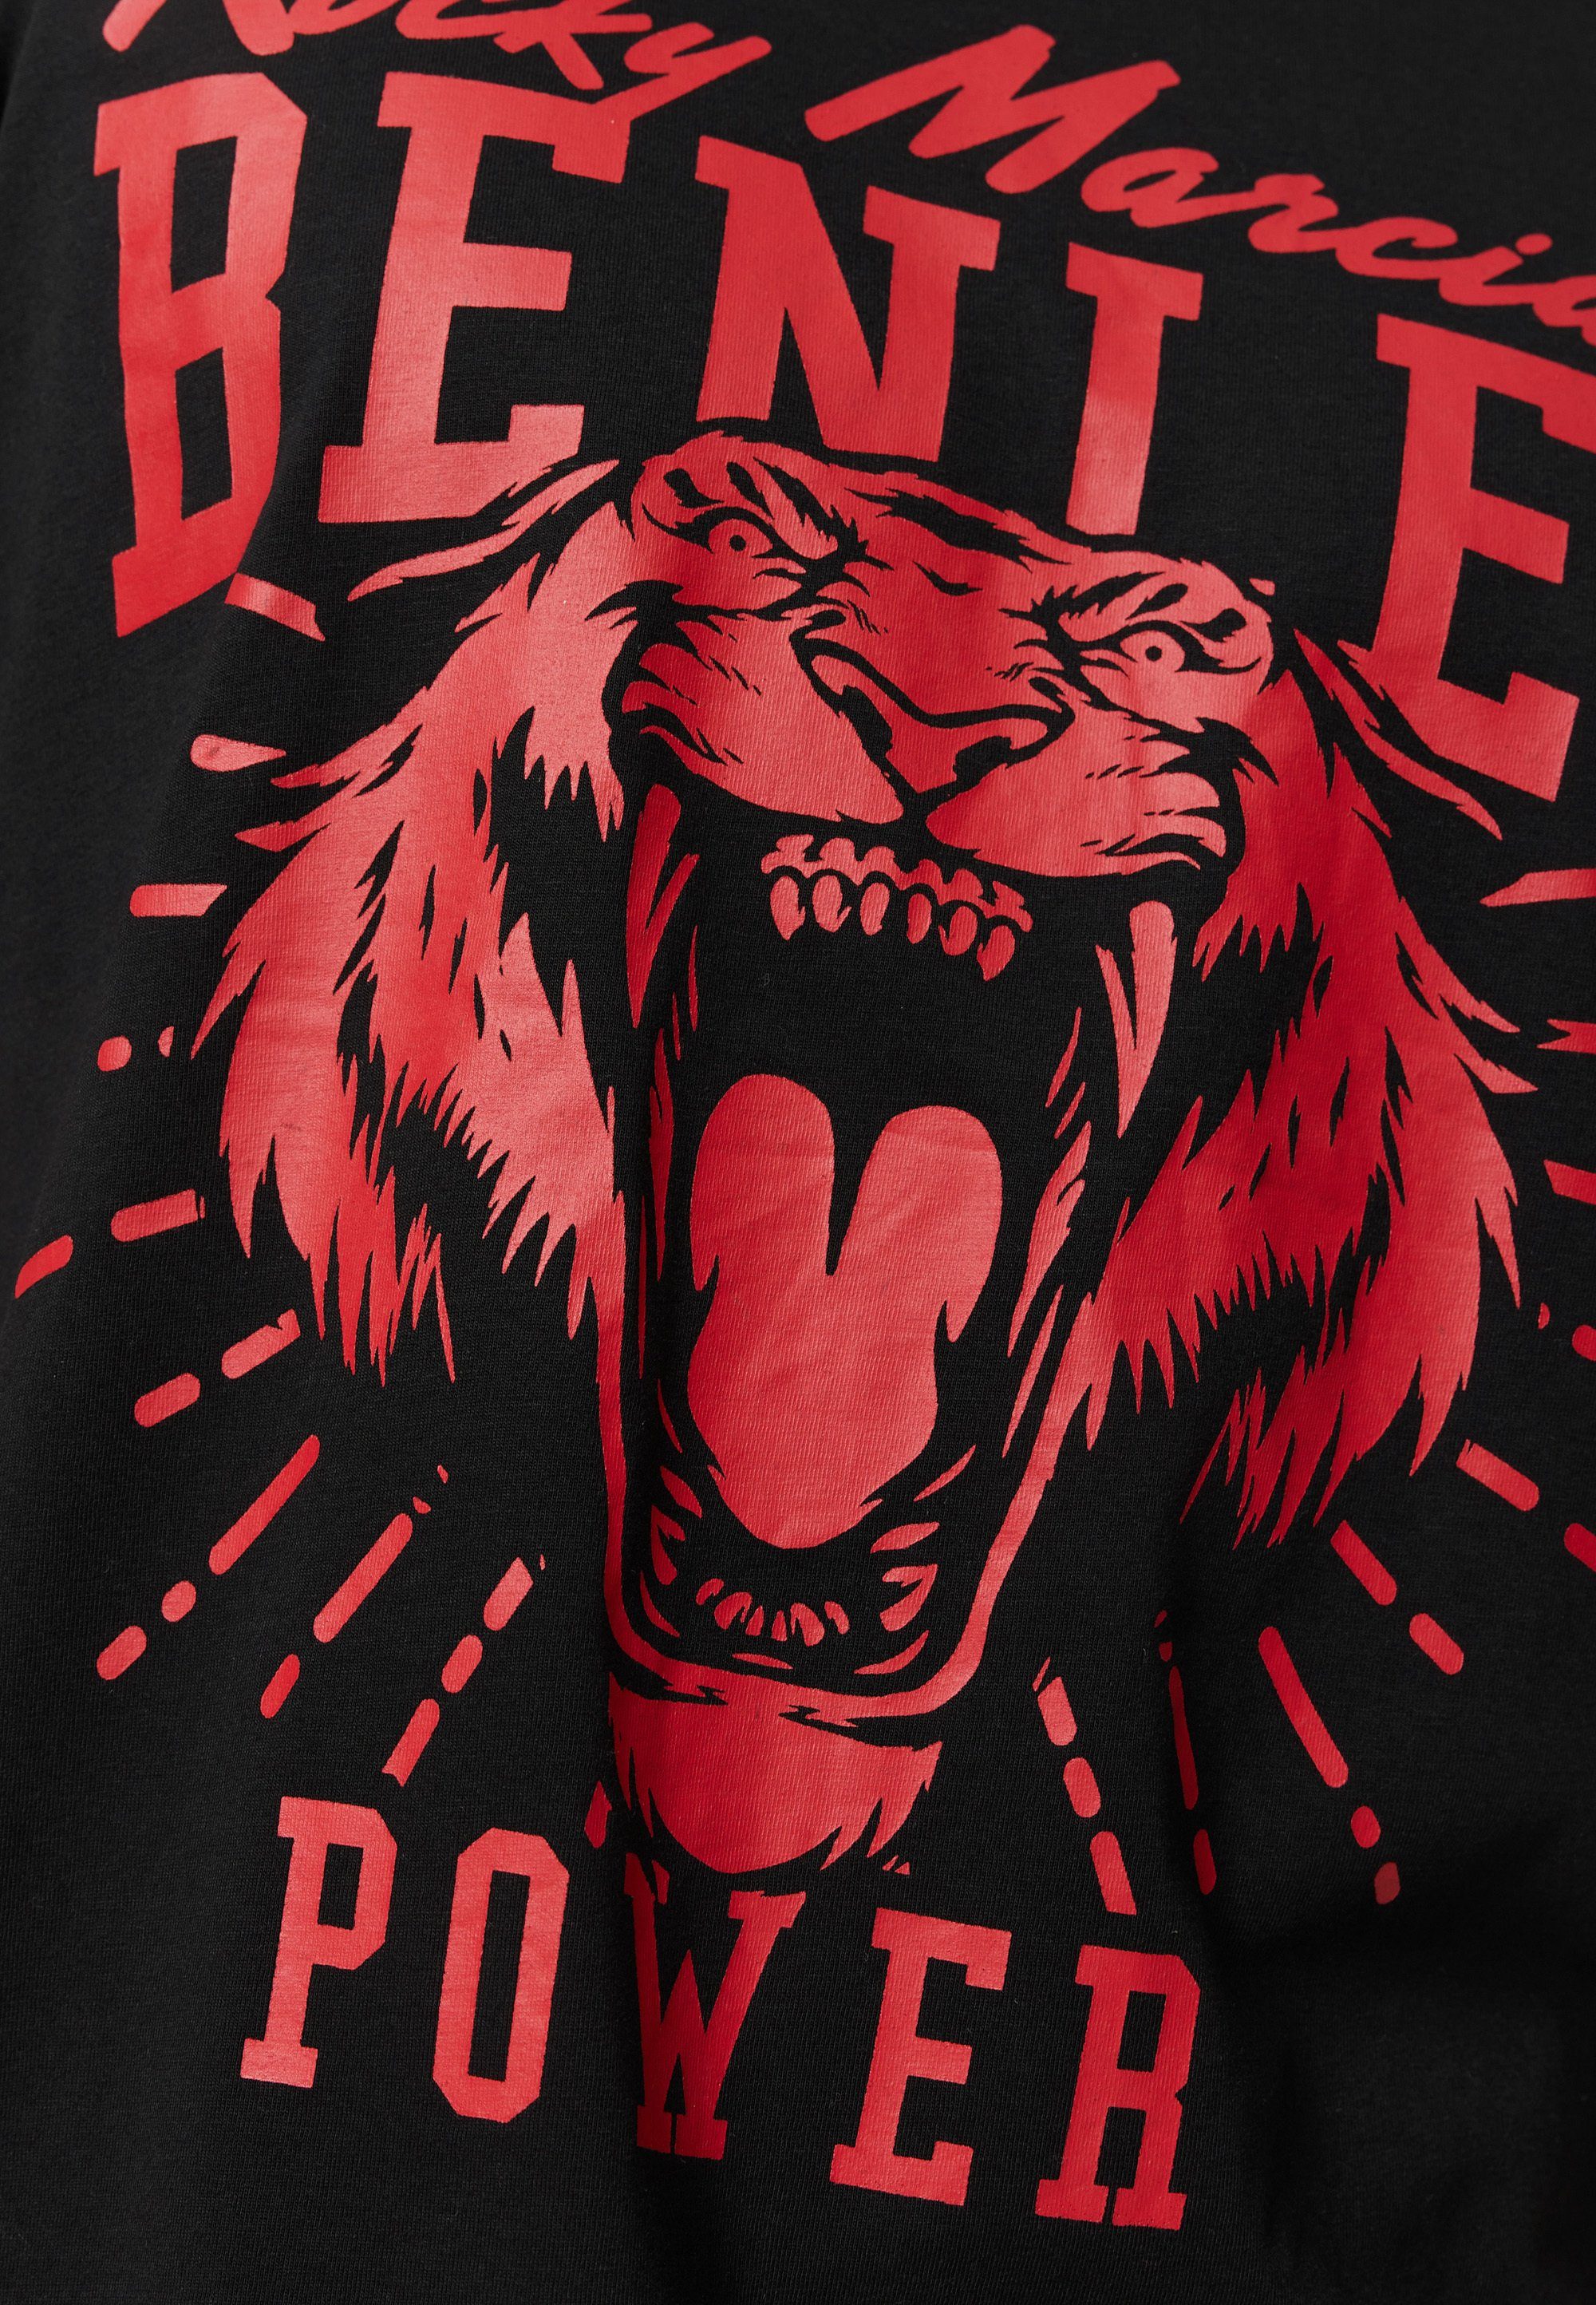 T-Shirt Marciano Benlee Rocky POWER Black/Red TIGER